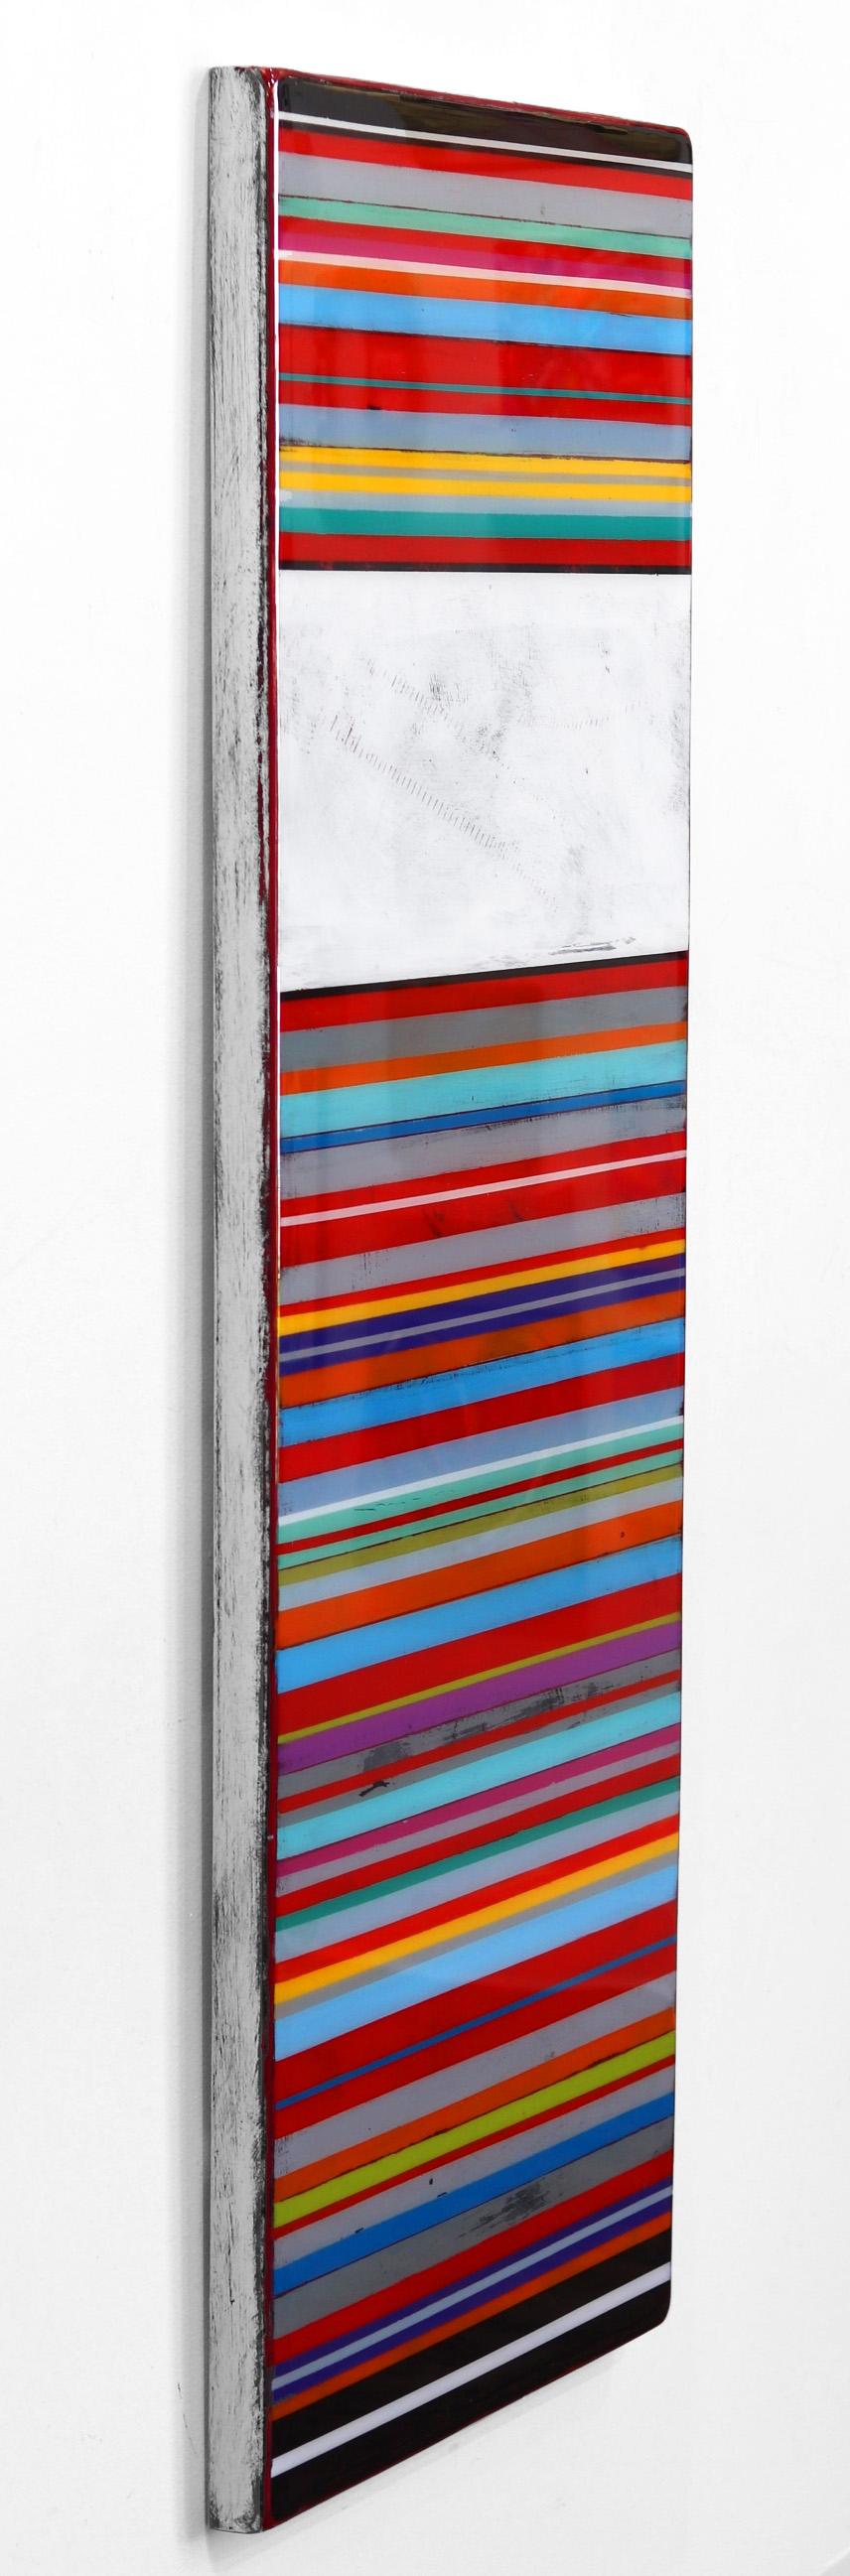 Summer Shade - Modern Acrylic and Resin Artwork - Minimalist Painting by Ricky Hunt